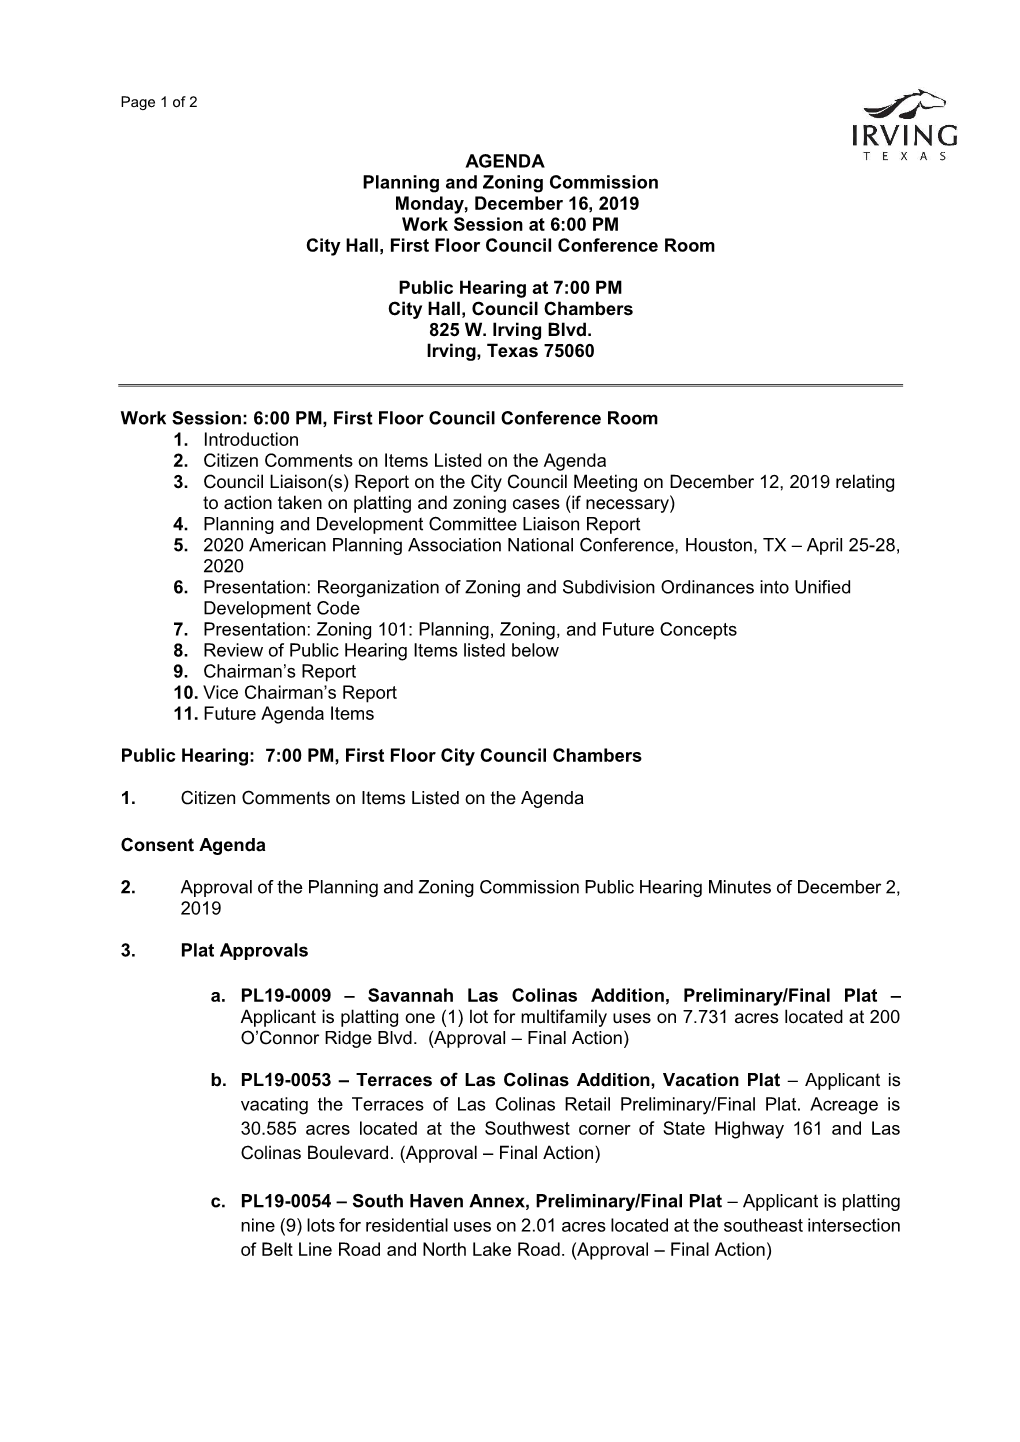 AGENDA Planning and Zoning Commission Monday, December 16, 2019 Work Session at 6:00 PM City Hall, First Floor Council Conference Room